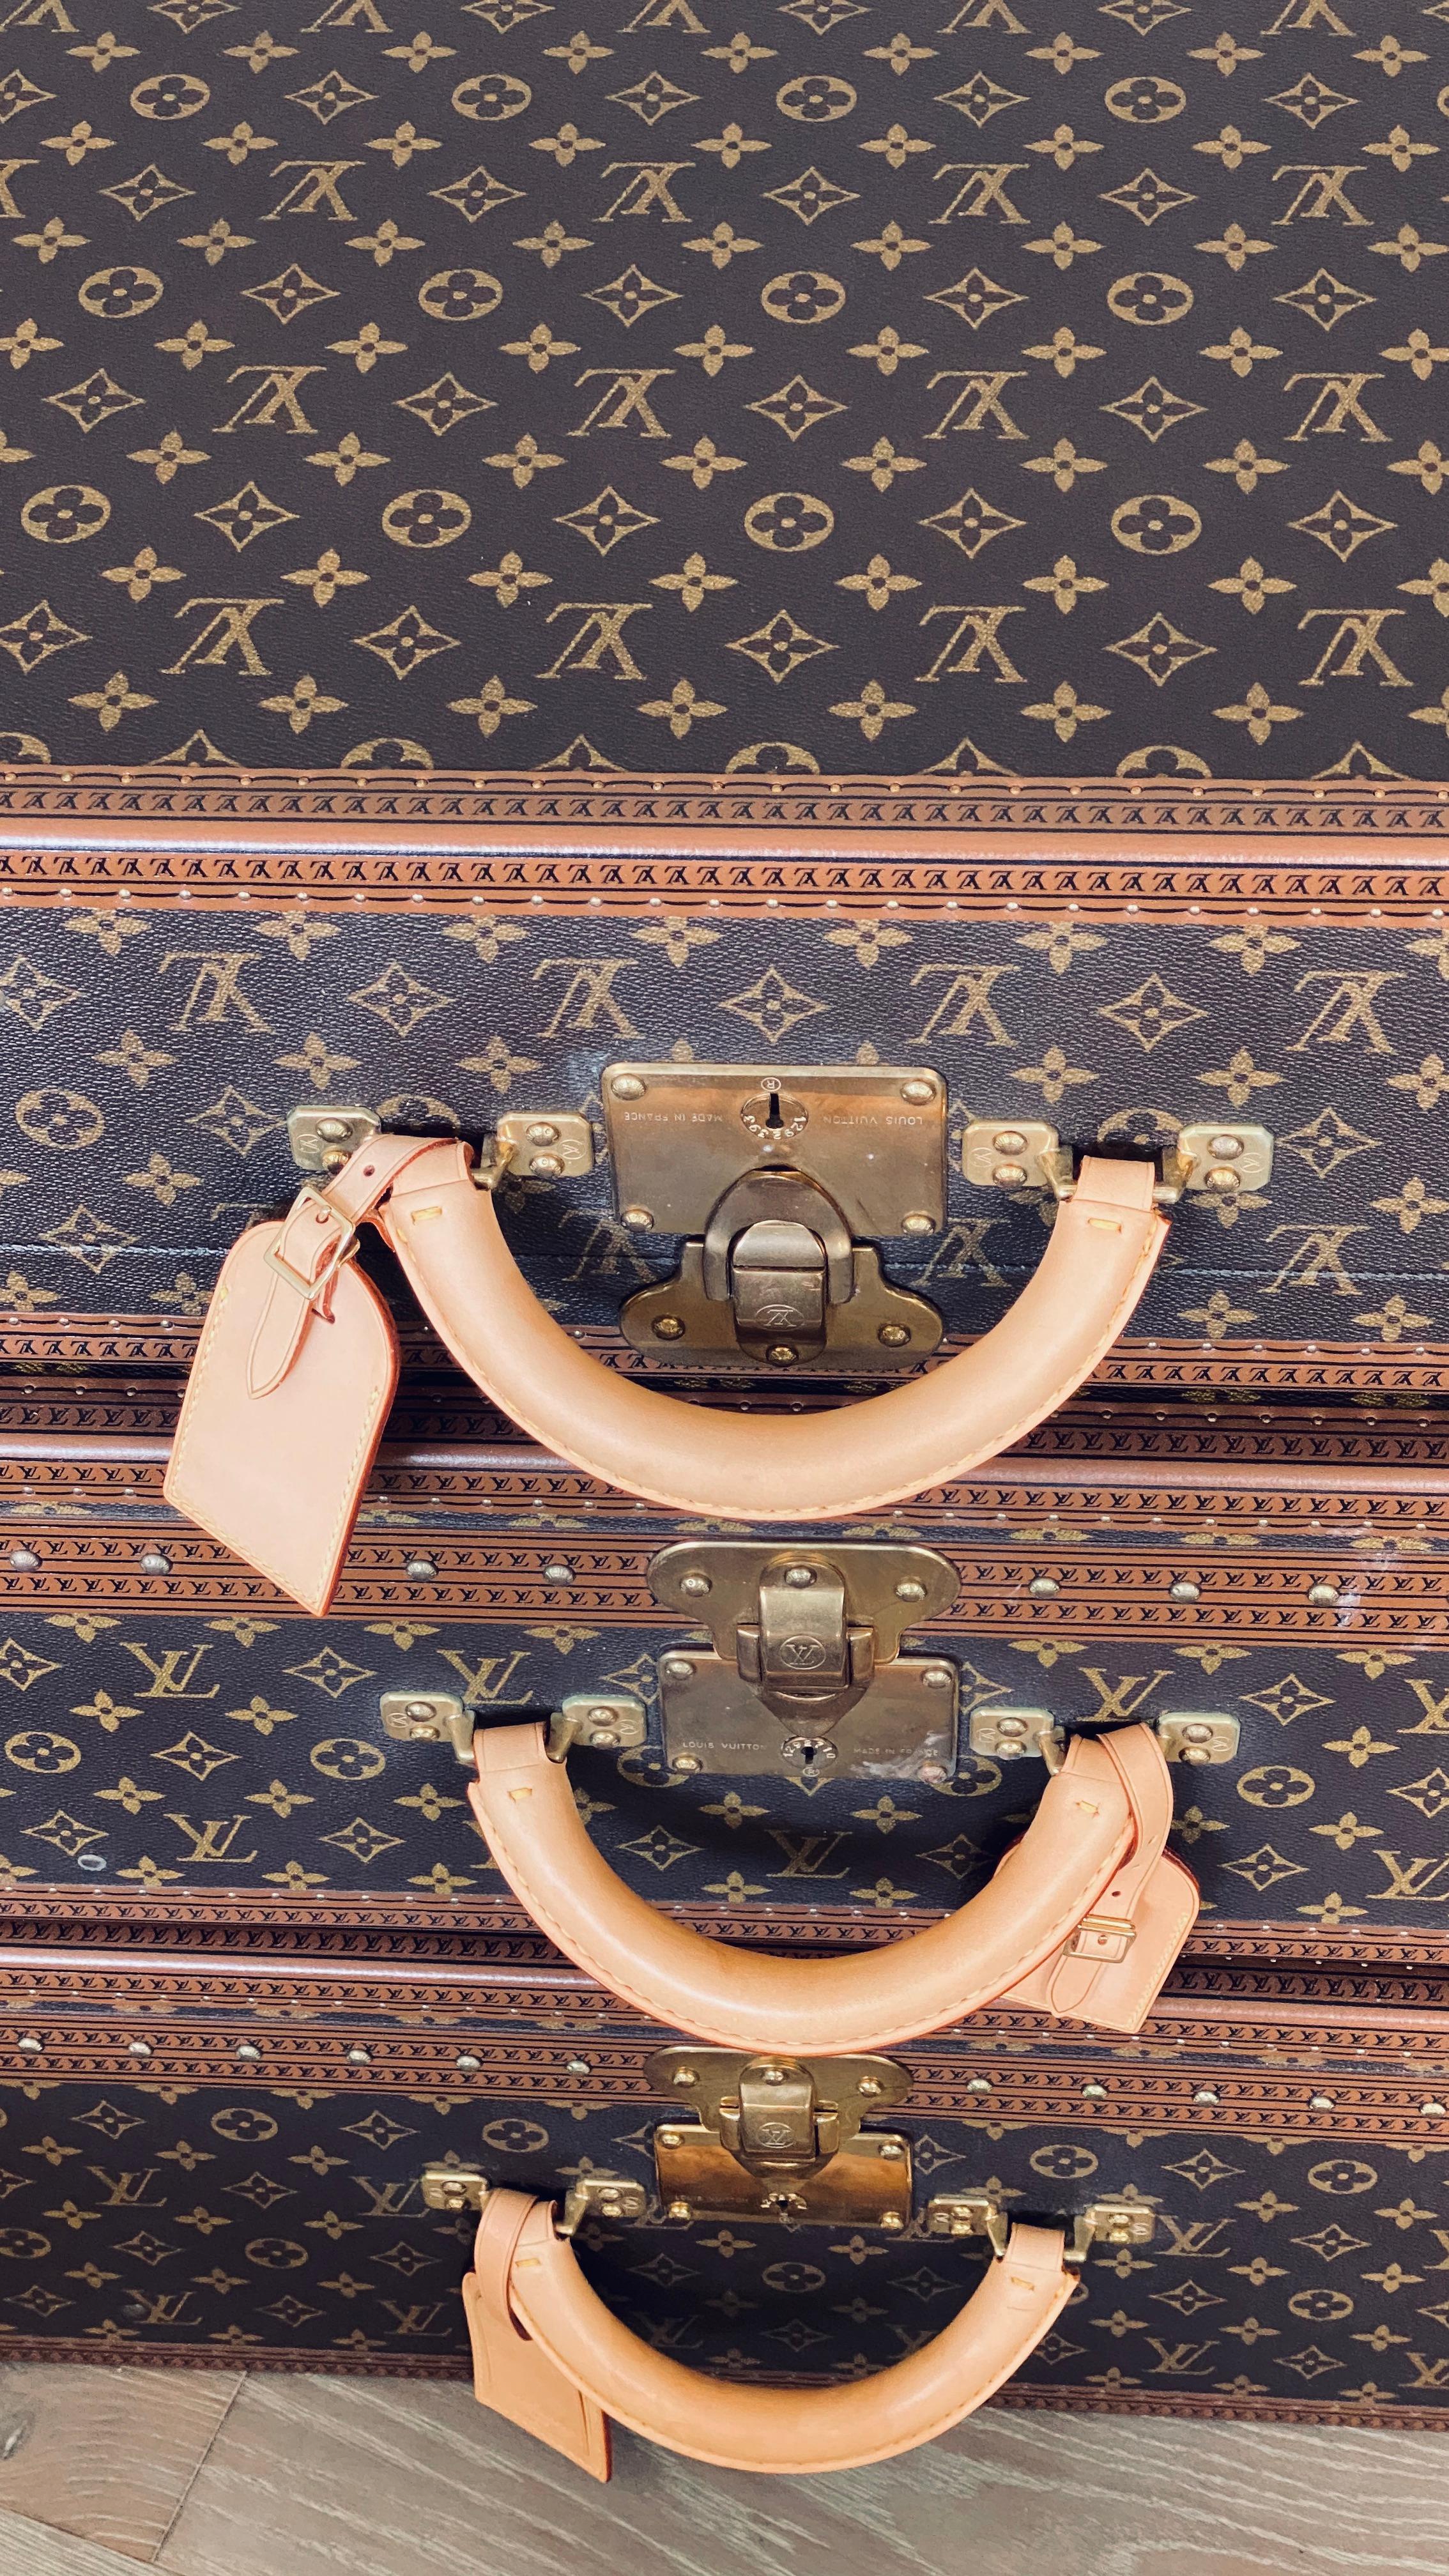 1960s-1970s Louis Vuitton 3- piece suitcase set

A graduated 3-piece set that is unused and has a hard side with original black canvas. All are marked with serial numbers. Tissue paper still in container. Includes bisten case.

Alzer 75 and 80